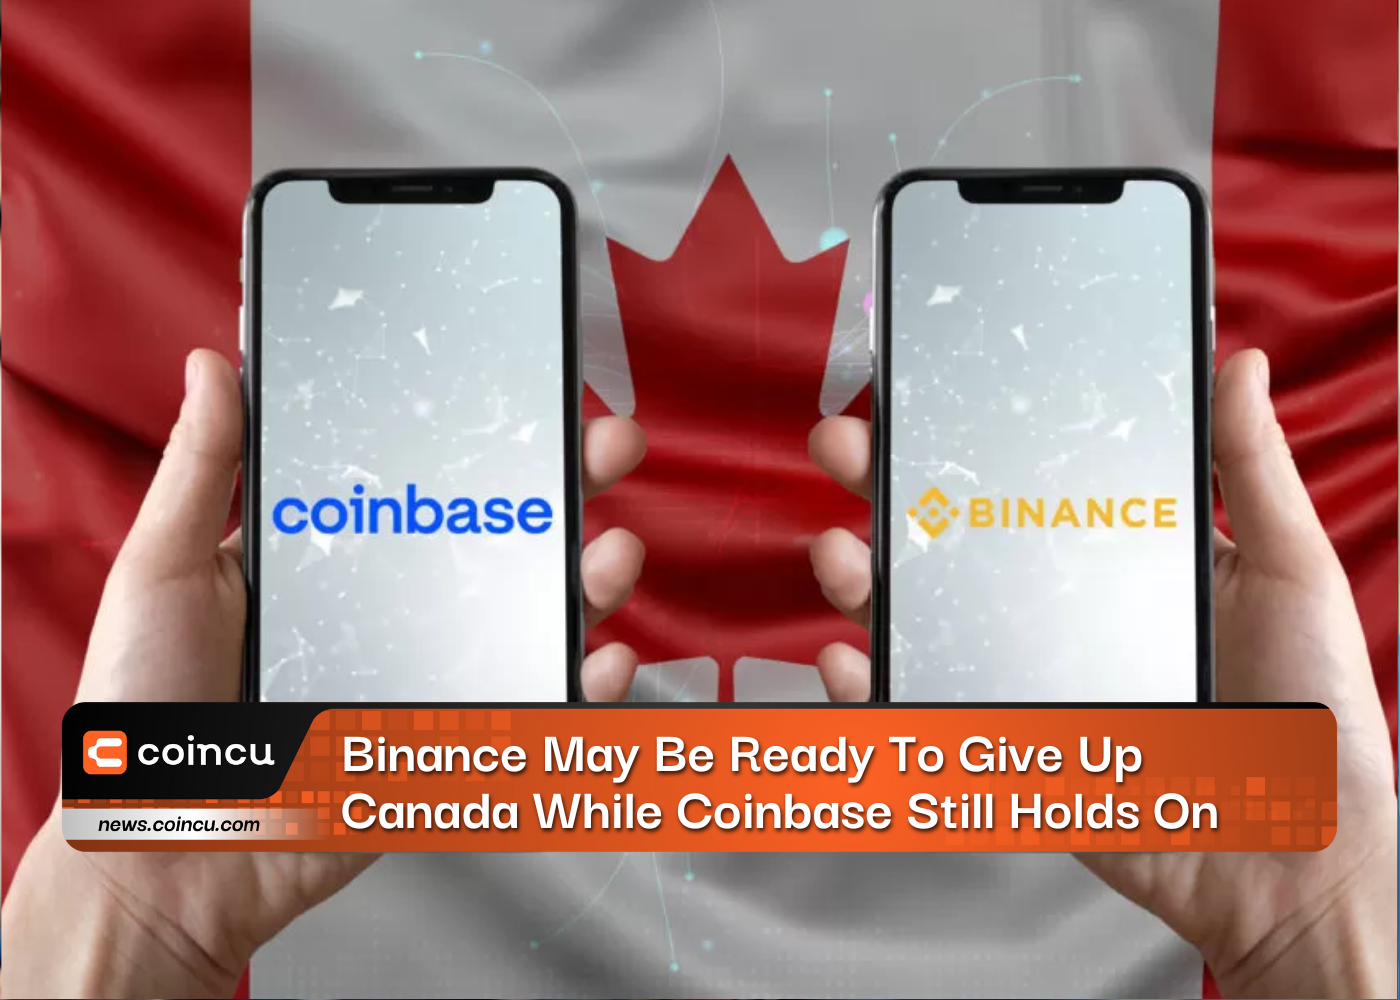 Binance May Be Ready To Give Up Canada While Coinbase Still Holds On